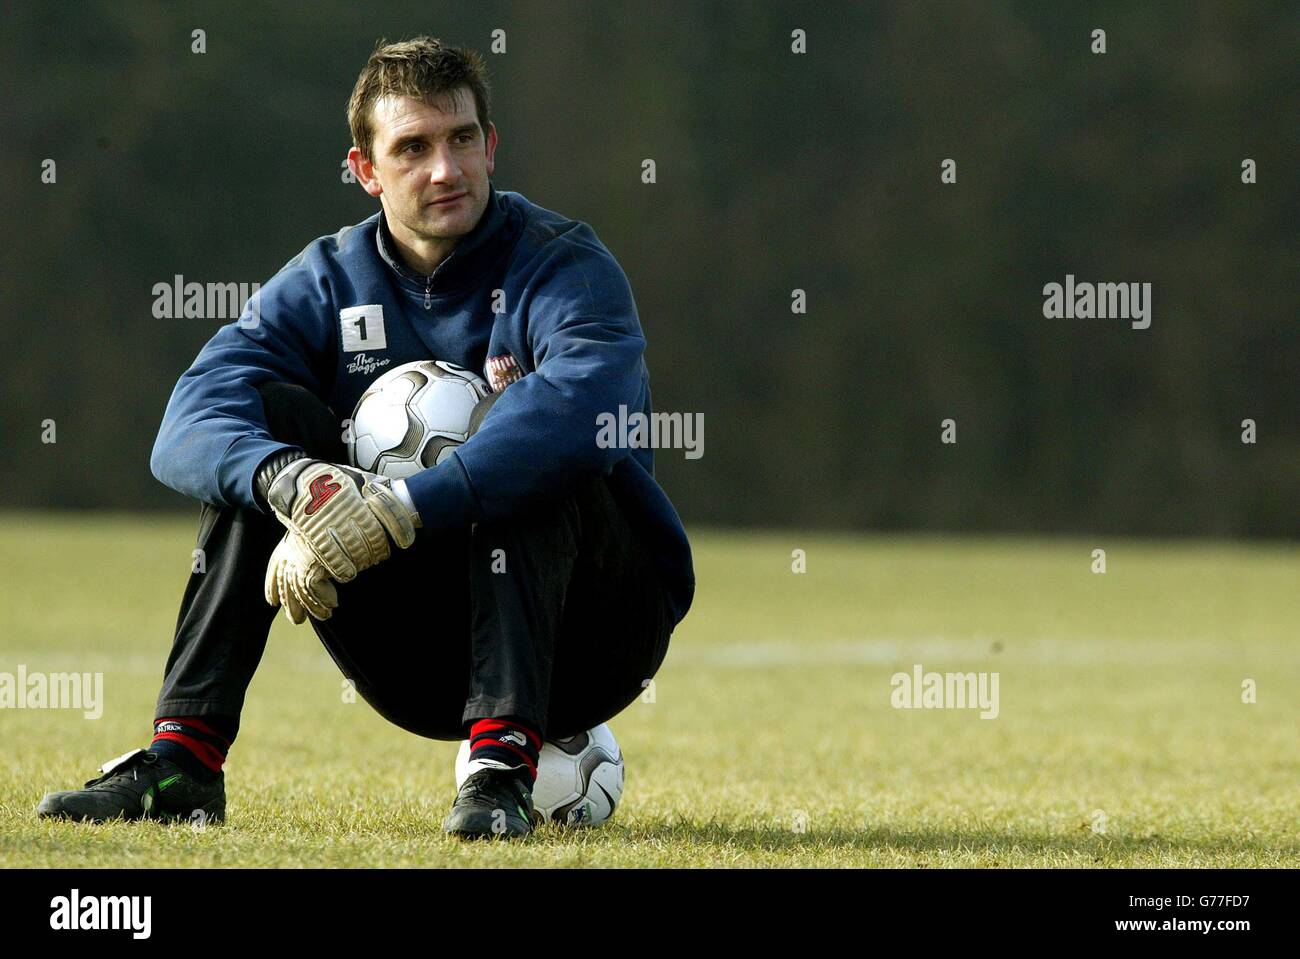 West Bromwich Albion goalkeeper Russell Hoult in relaxed mood during a training session at Aston University Sports Ground, Birmingham, prior to Sunday's home game against West Ham United. Both teams are fighting to avoid relegation. Stock Photo